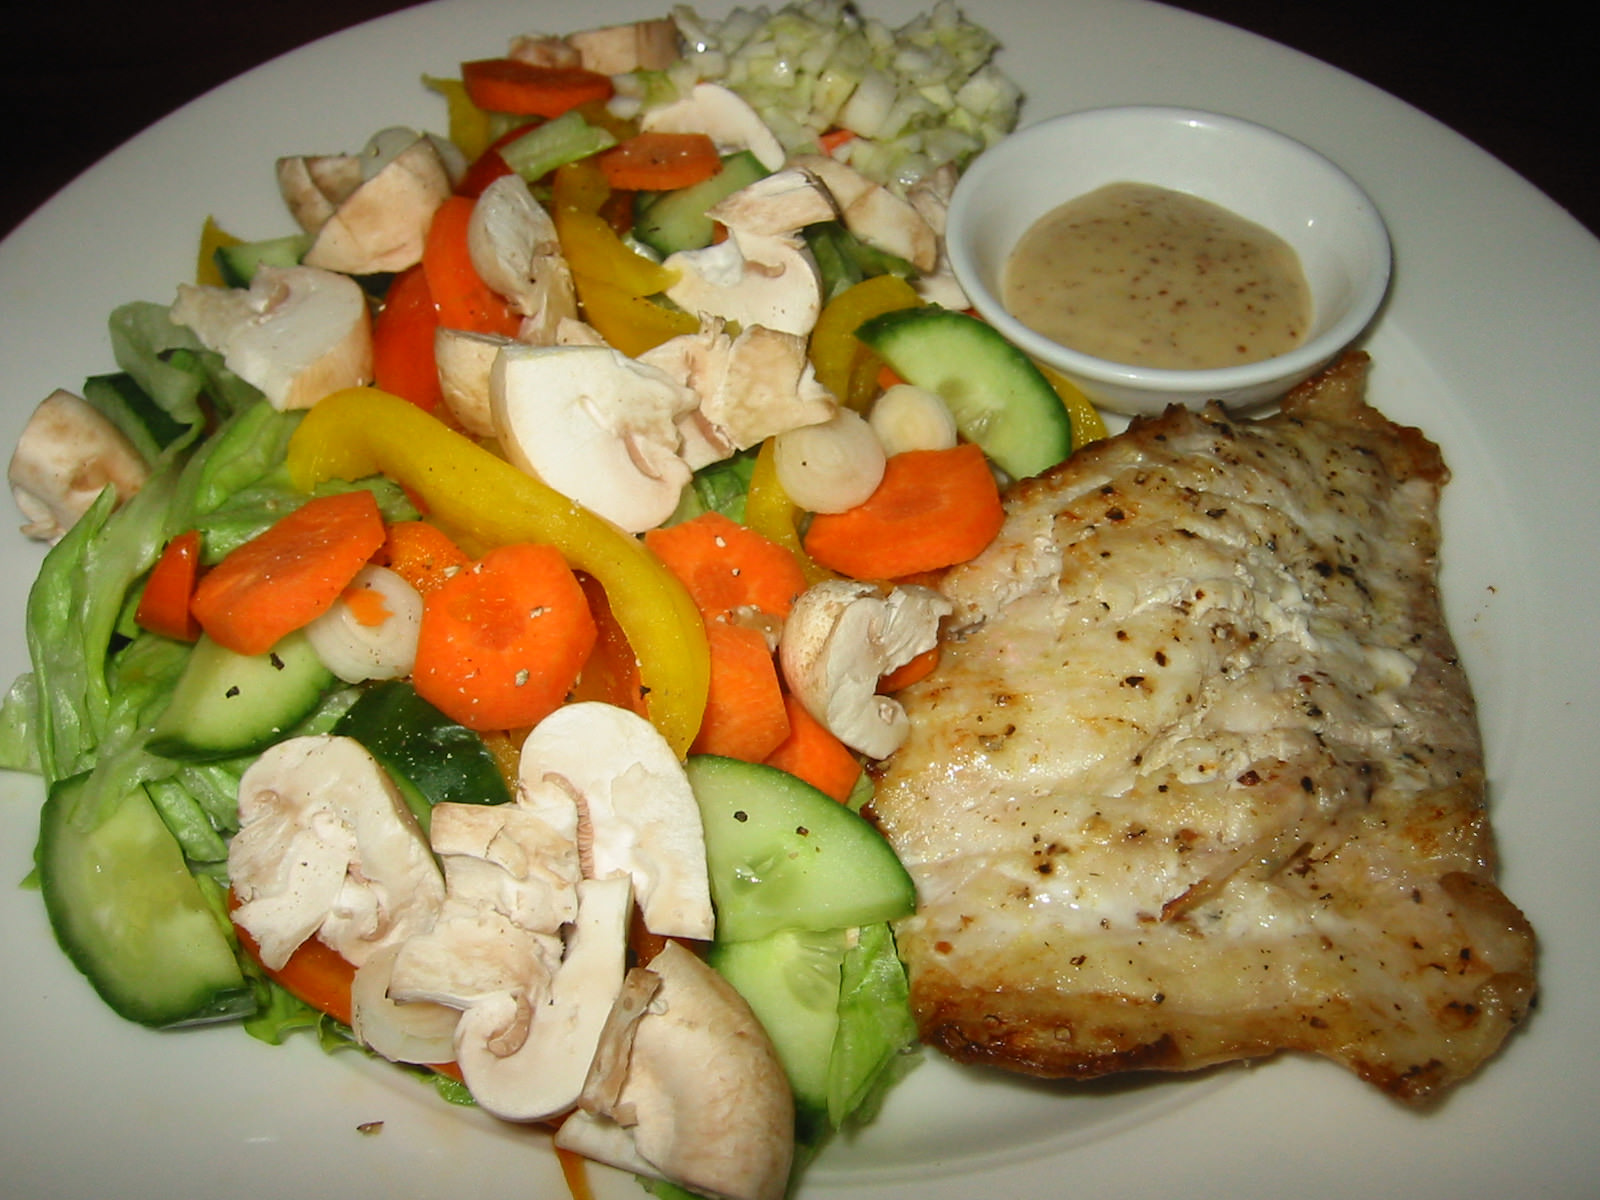 Grilled fish and salad